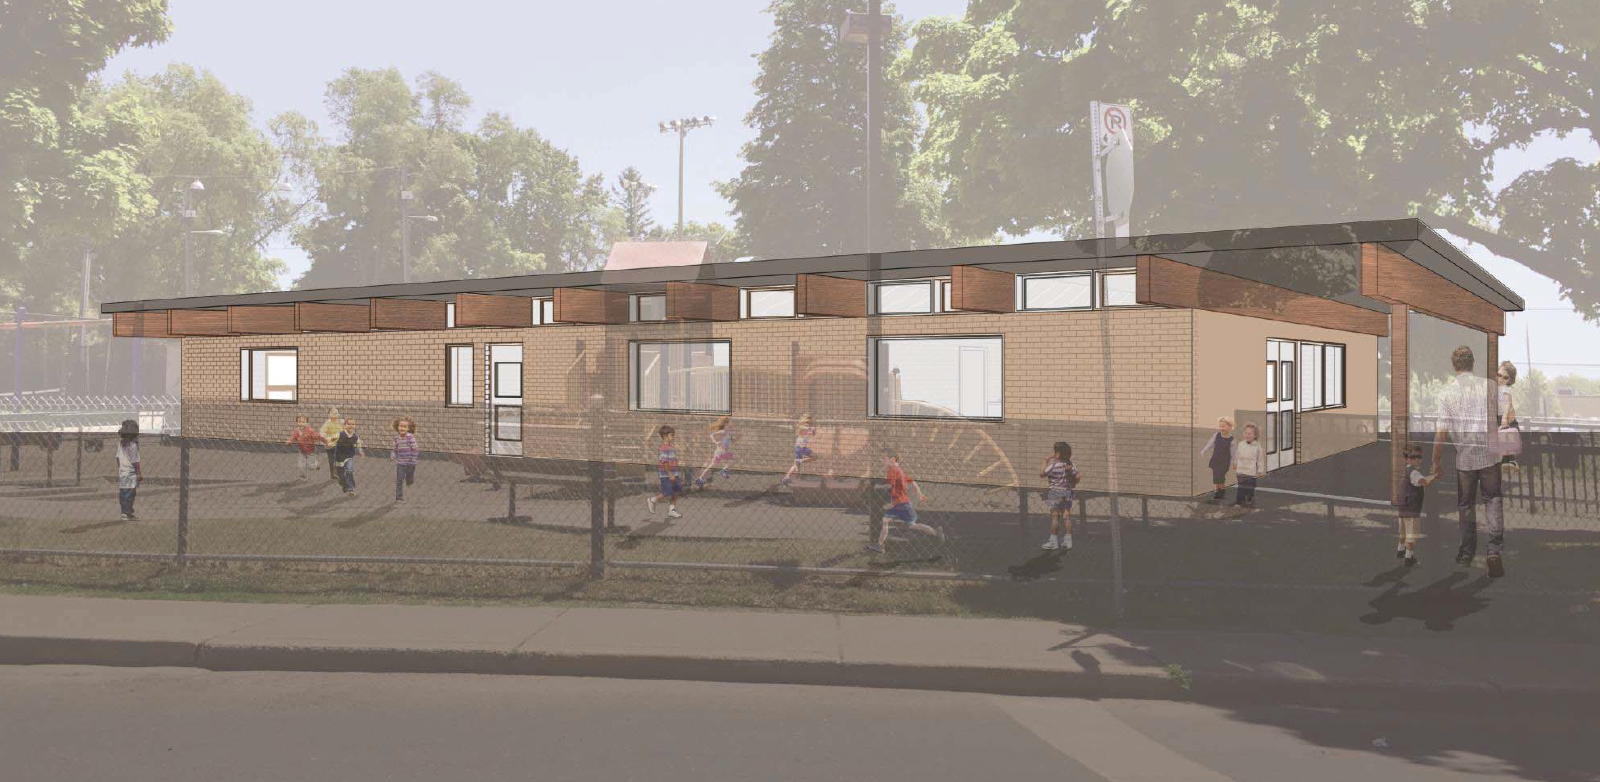 A rendering of the proposed design for the exterior of the Topham Park Clubhouse